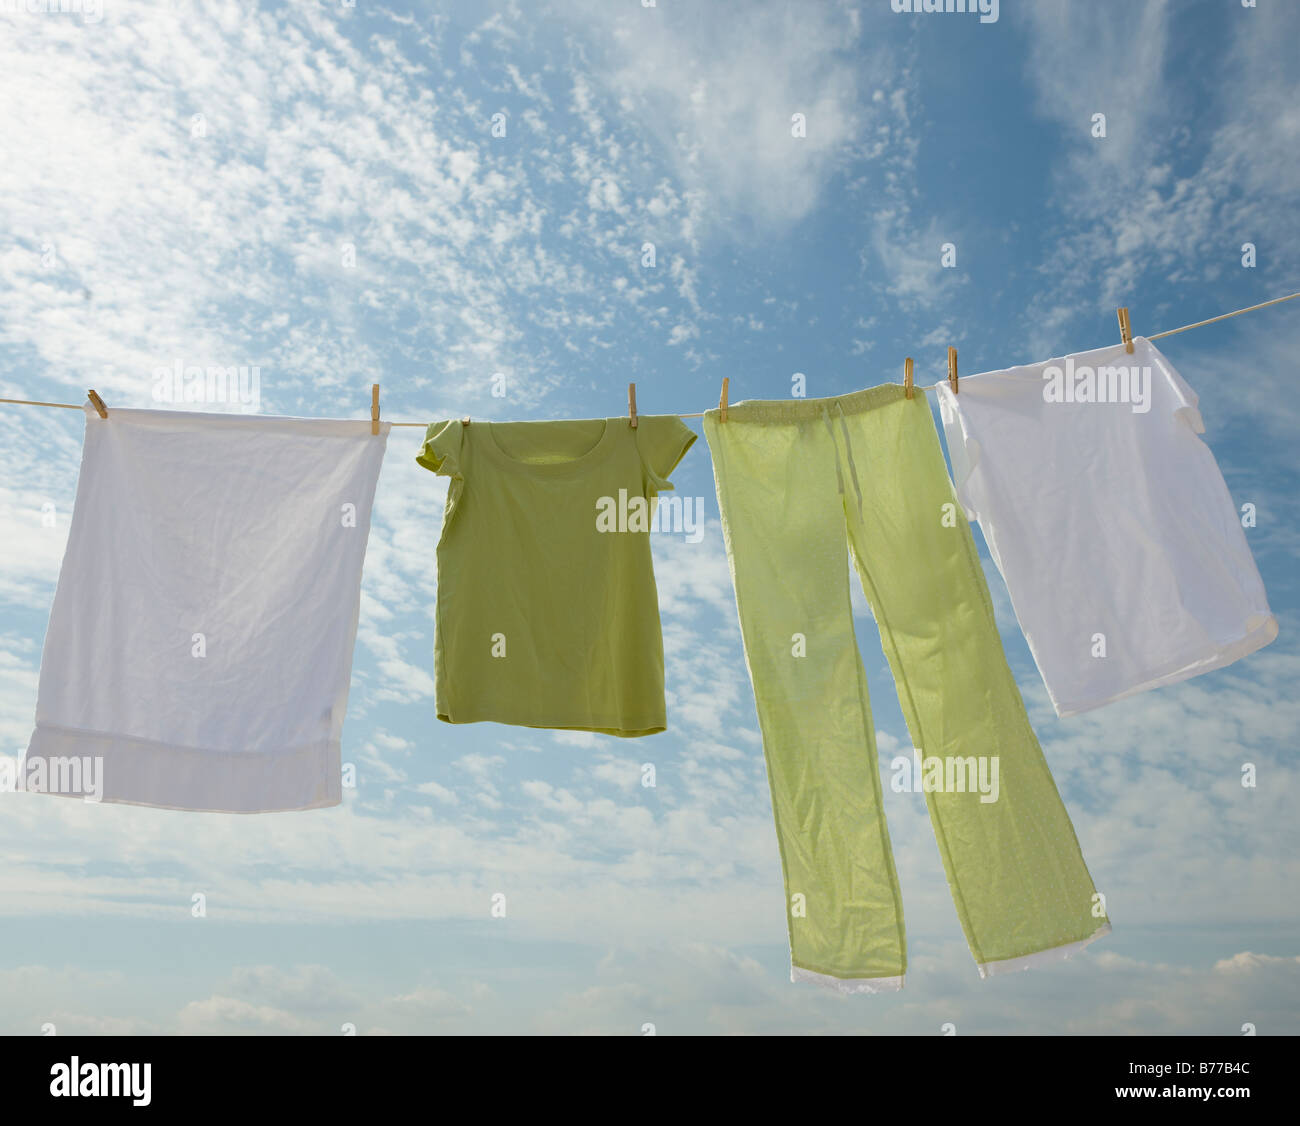 Clothes hanging from clothesline Stock Photo - Alamy